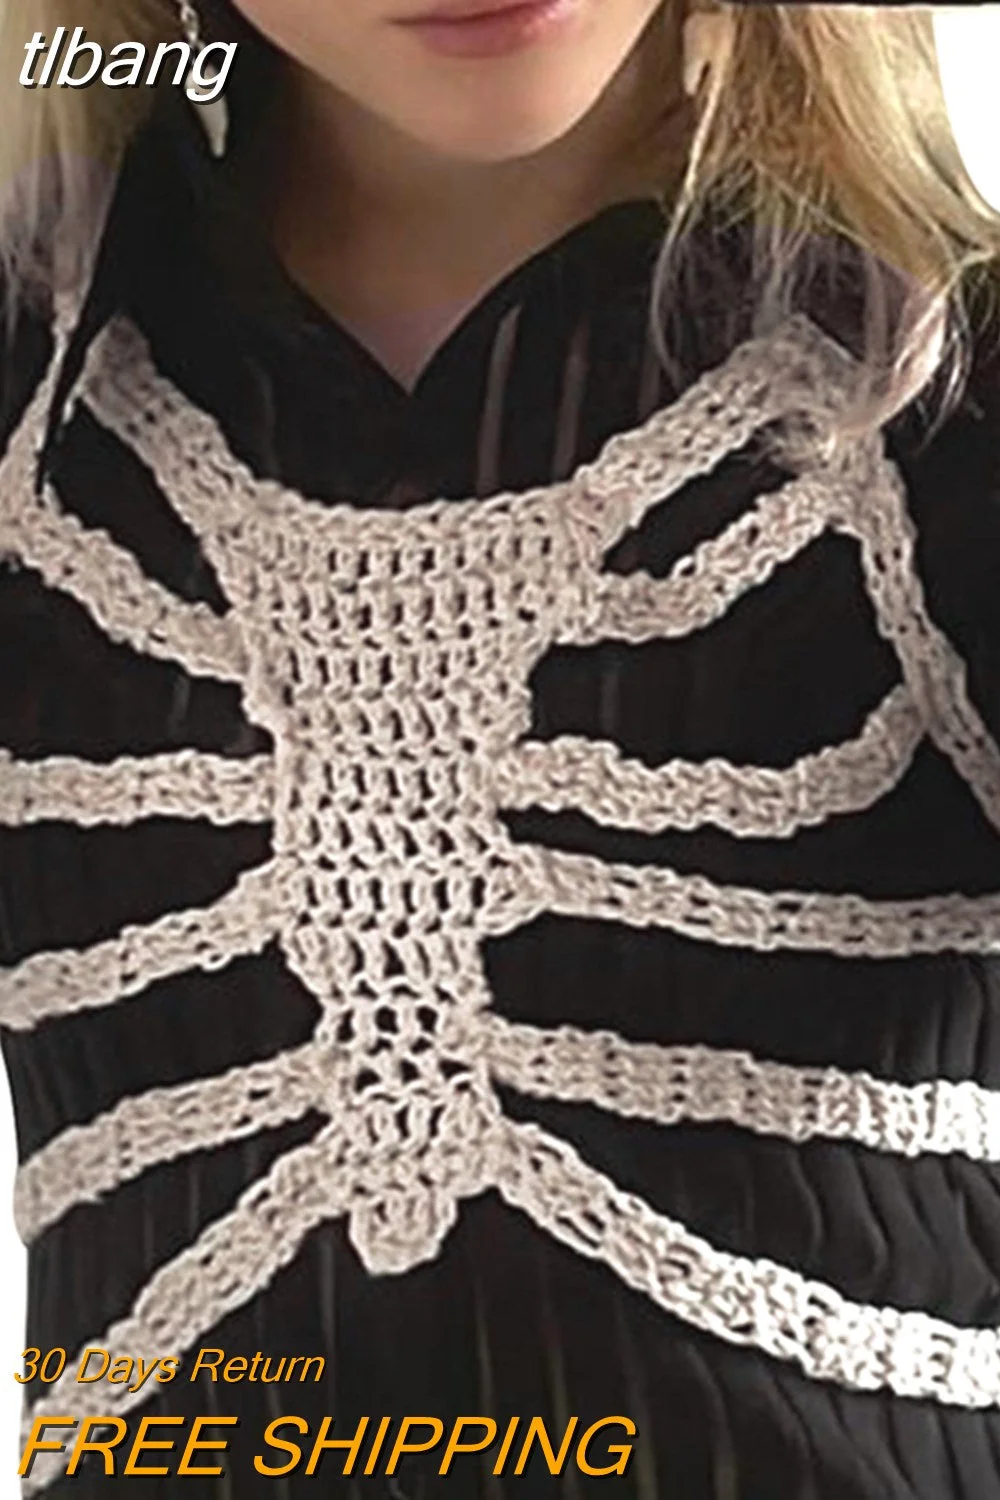 tlbang 2000s Skeleton Crochet Top Gothic Aesthetic Hollow Out Knitted Tshirt Women Tanks Streetwear y2k Dark Academia Clothes